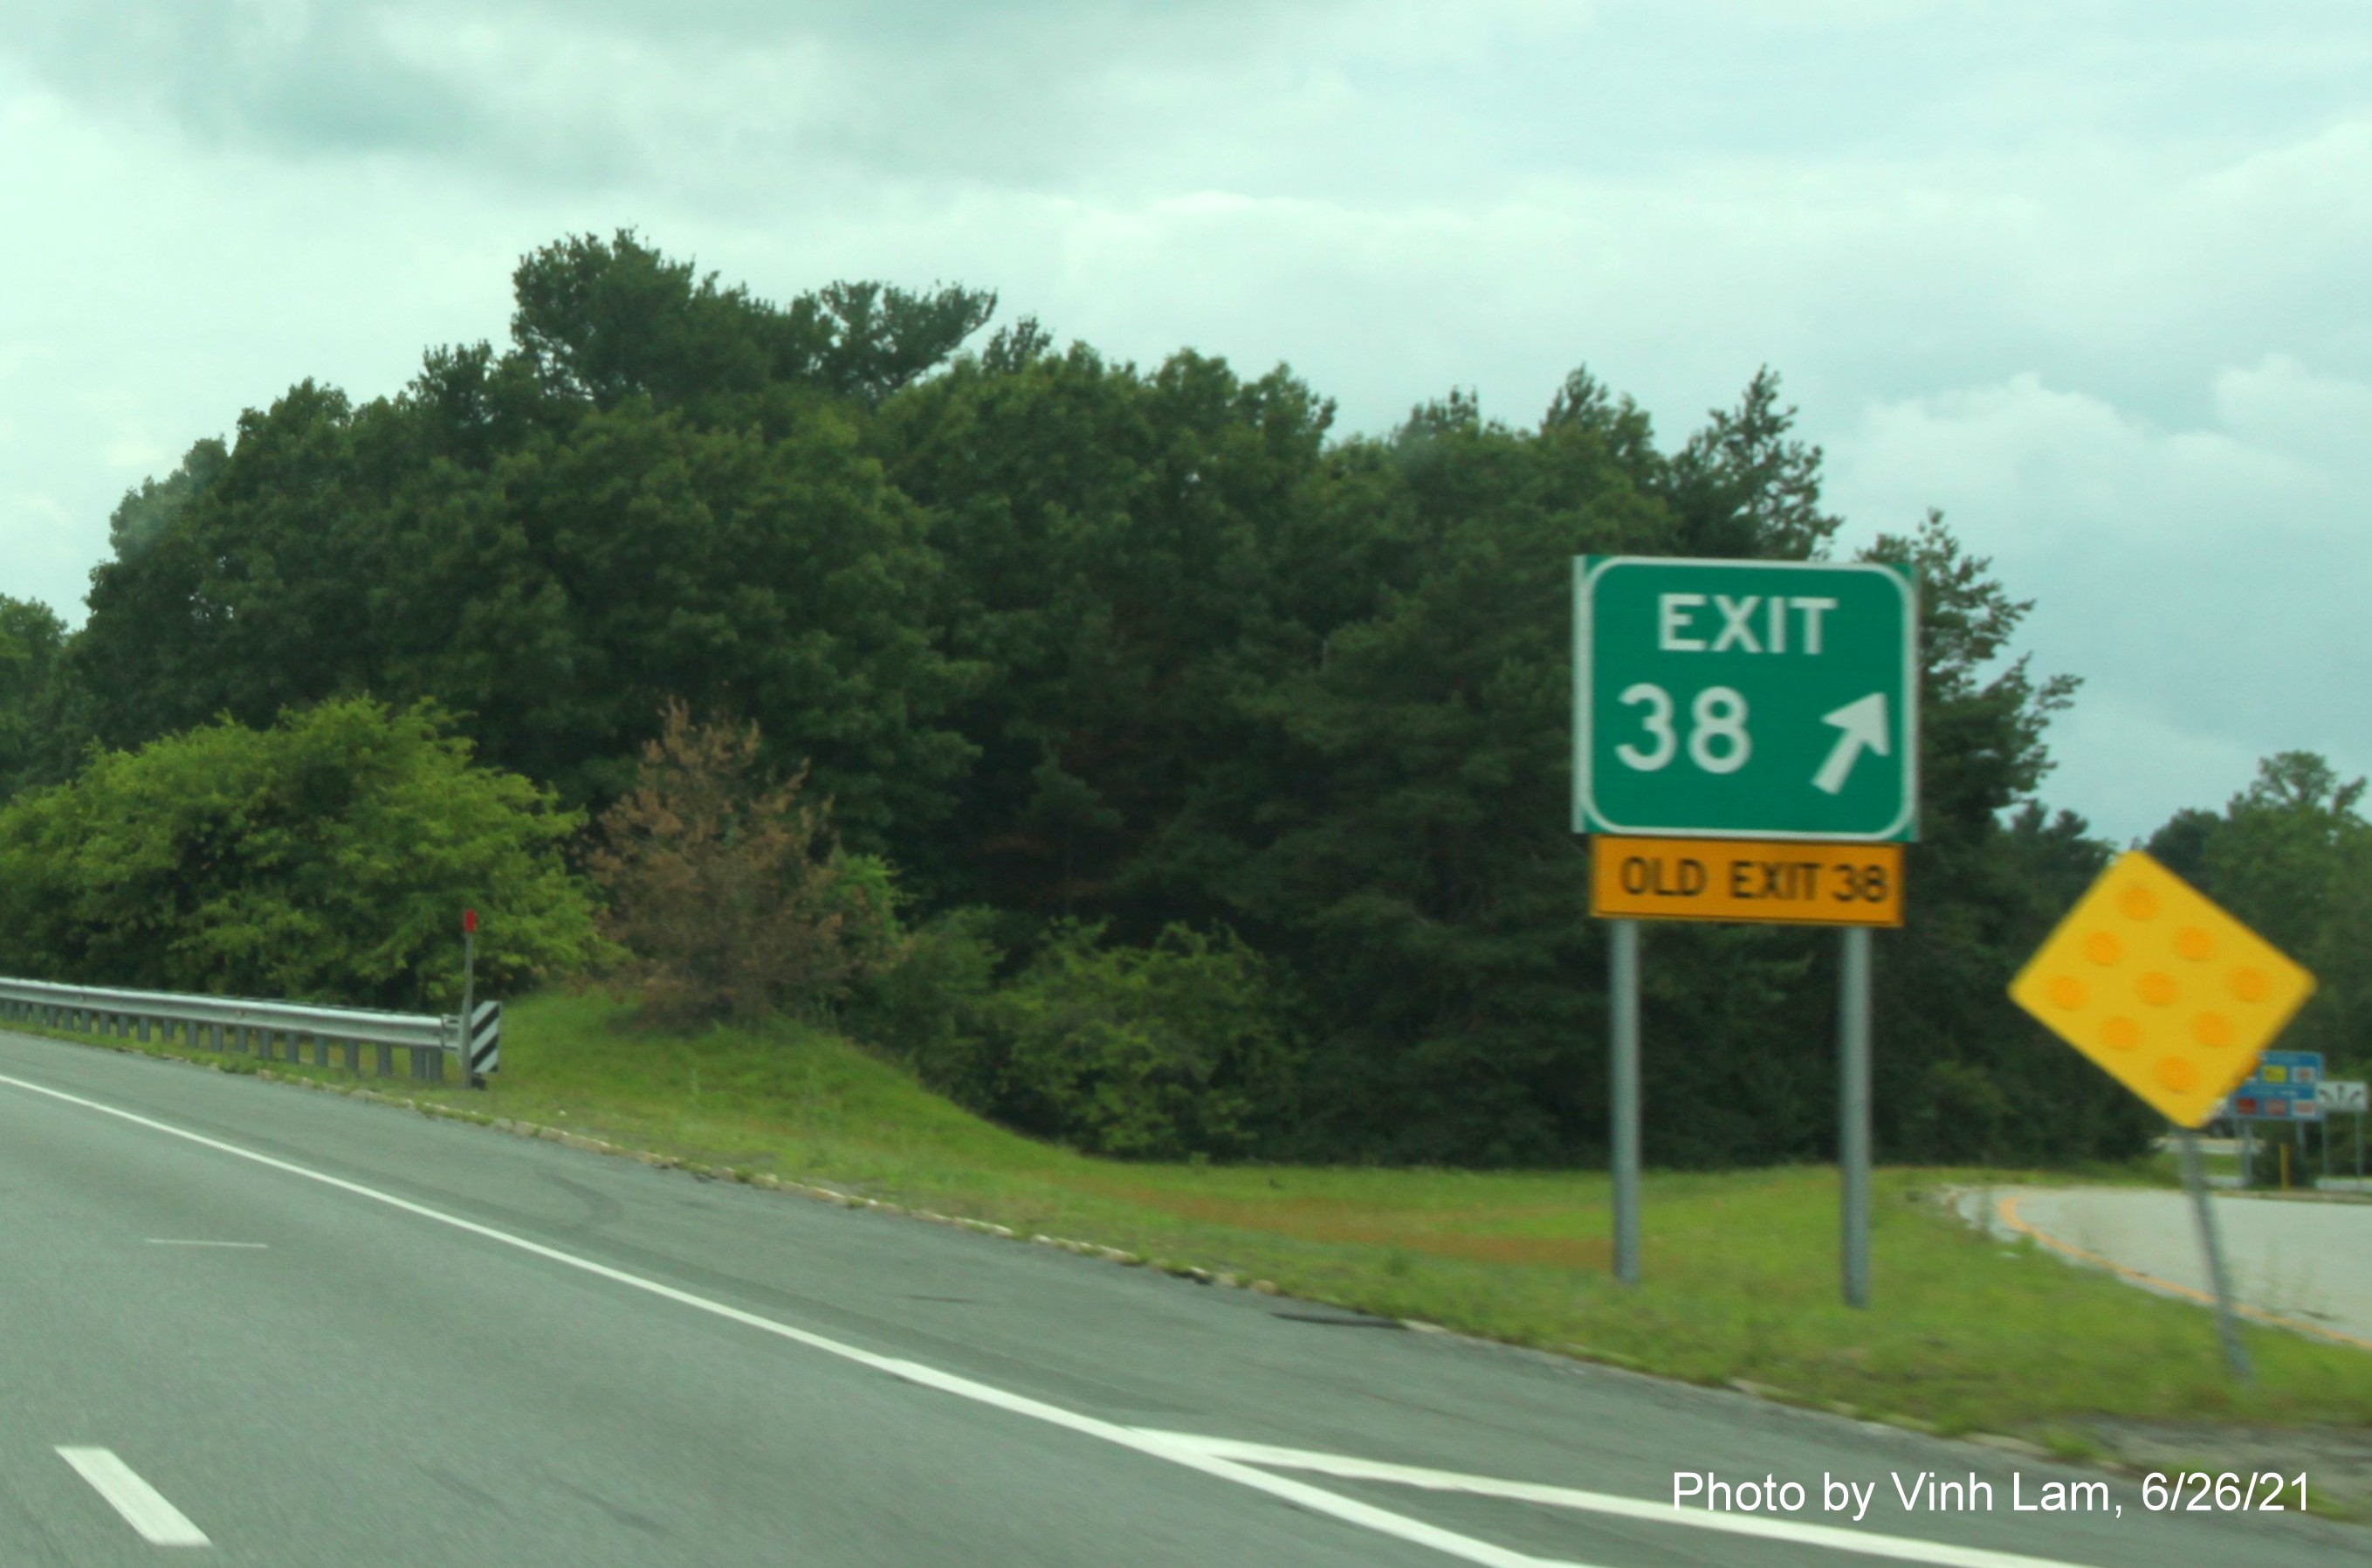 Image of gore sign for MA 38 exit with old sequential exit number, and matching Old Exit 38 sign below, on I-495 South in Tewksbury, by Vinh Lam, June 2021